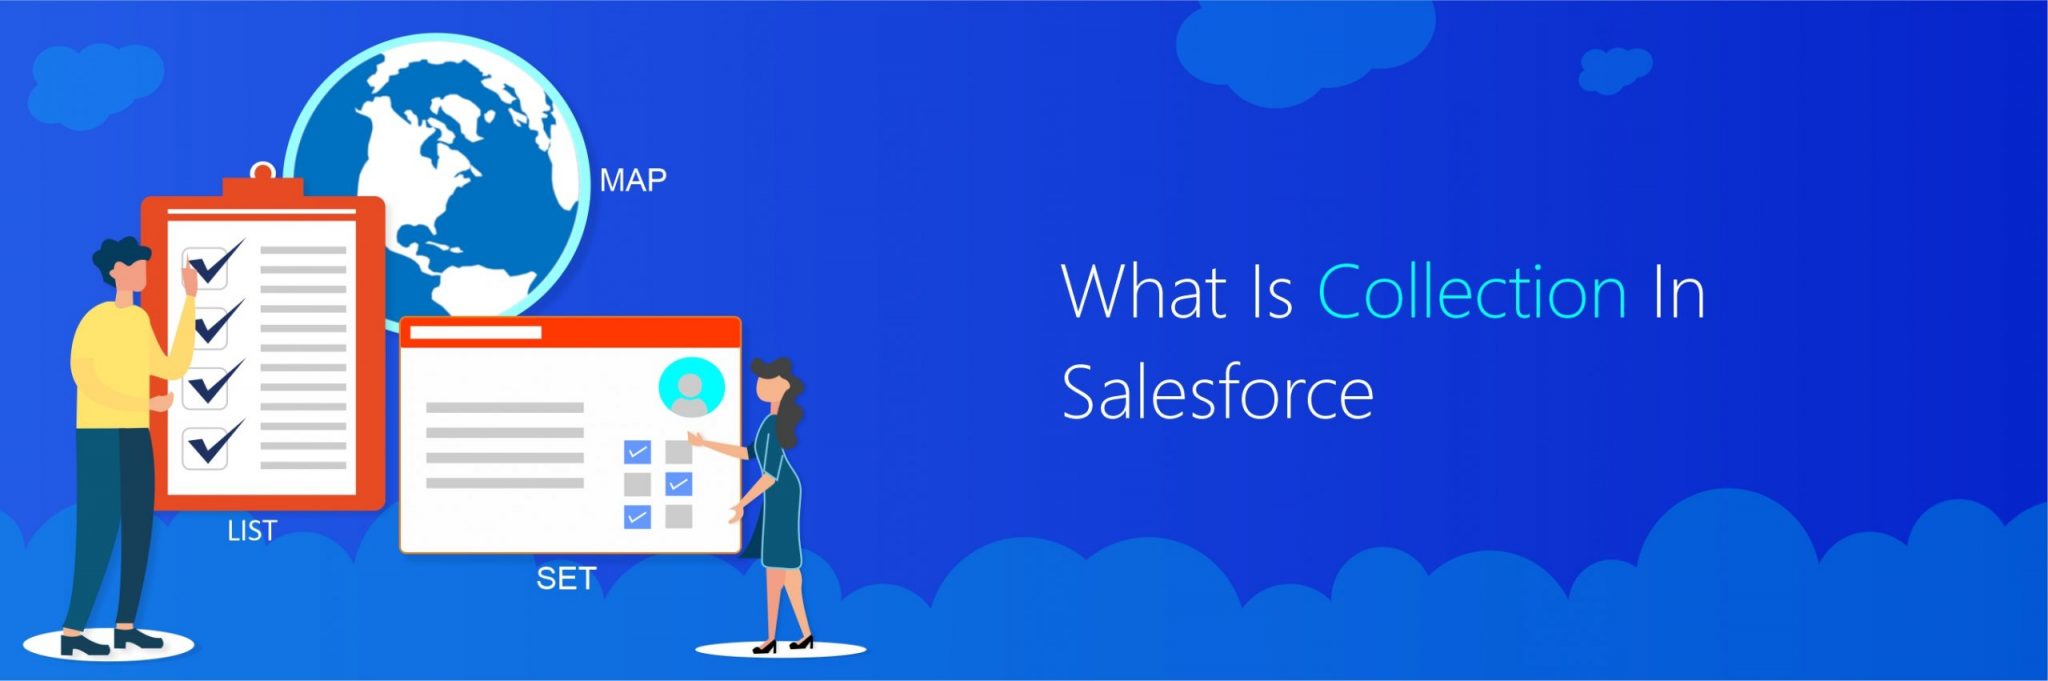 What-is-collection-in-salesforce-scaled-1-2048x681